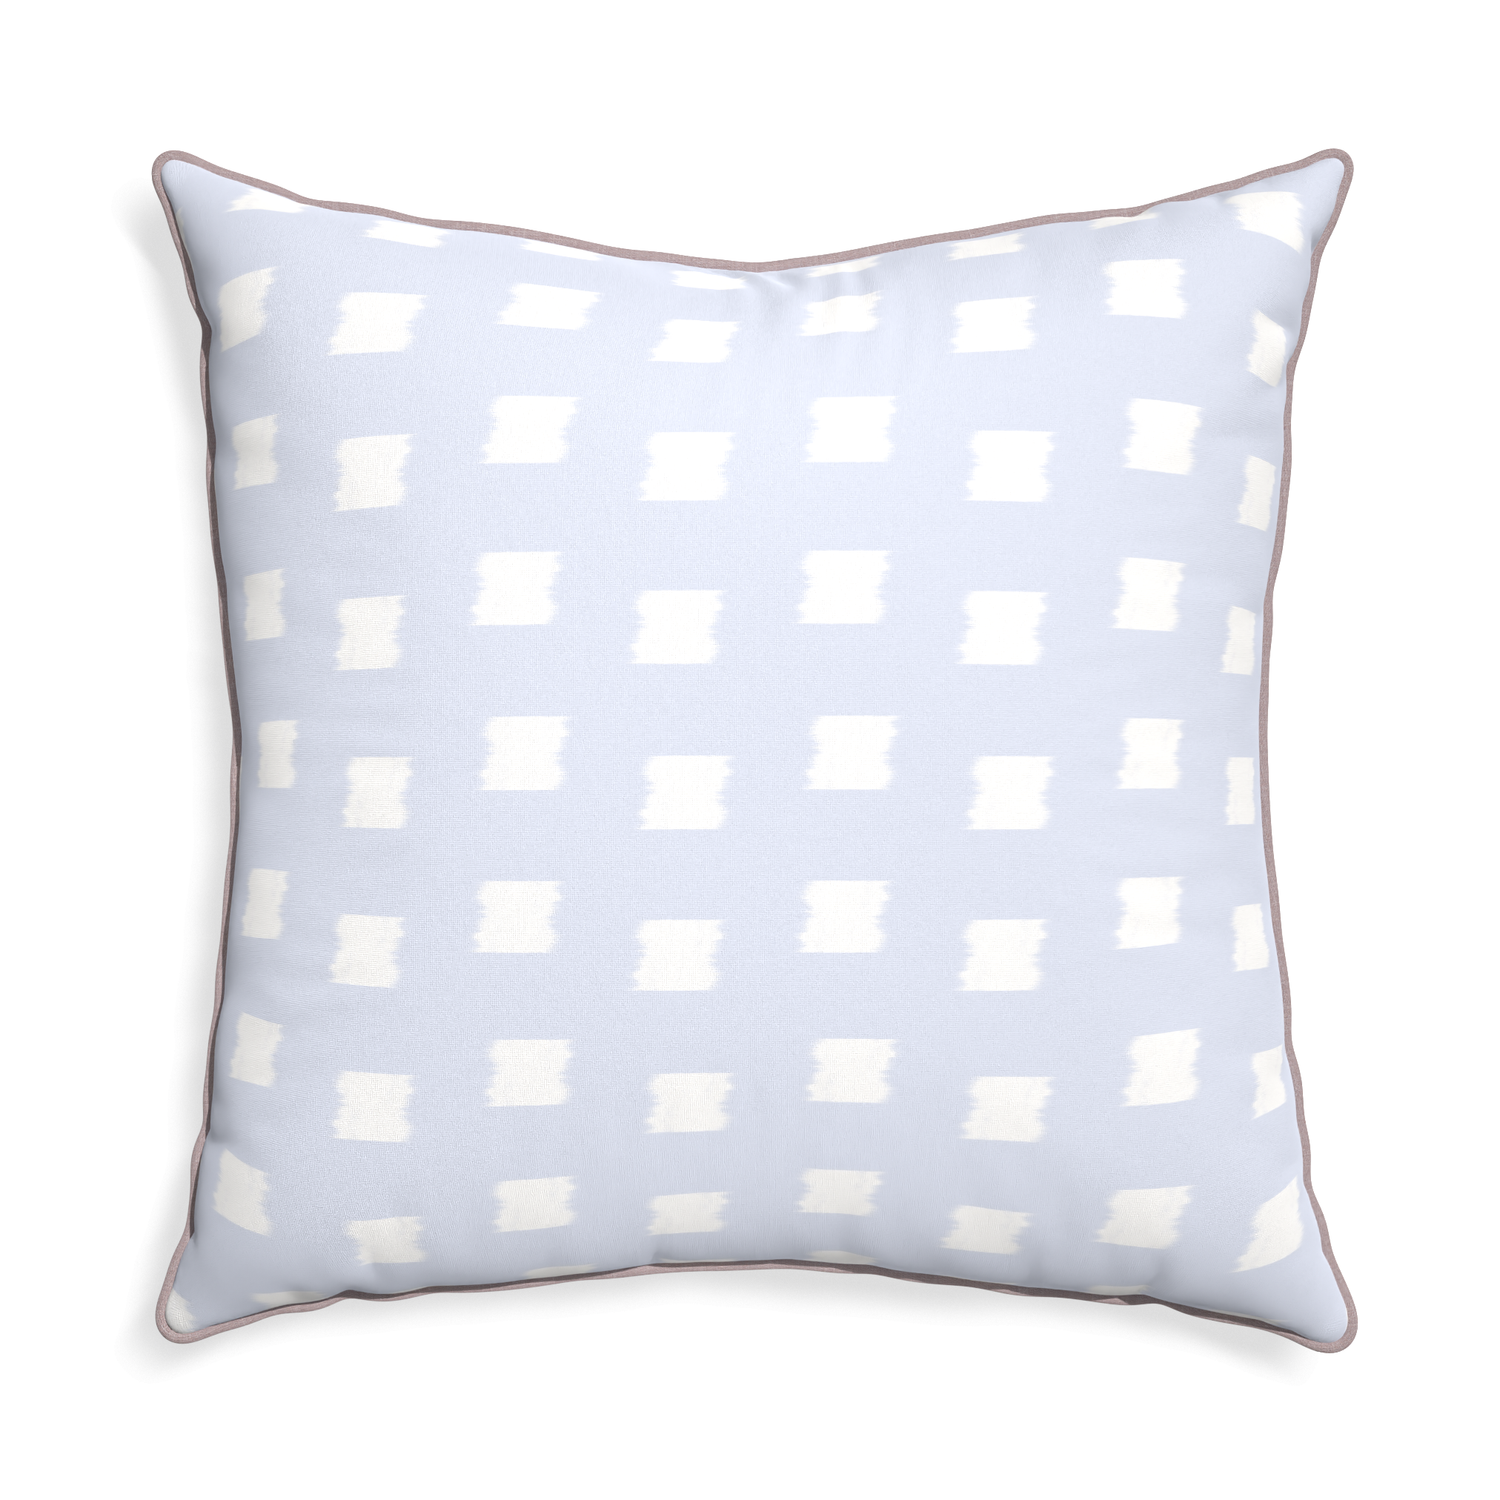 Euro-sham denton custom sky blue patternpillow with orchid piping on white background